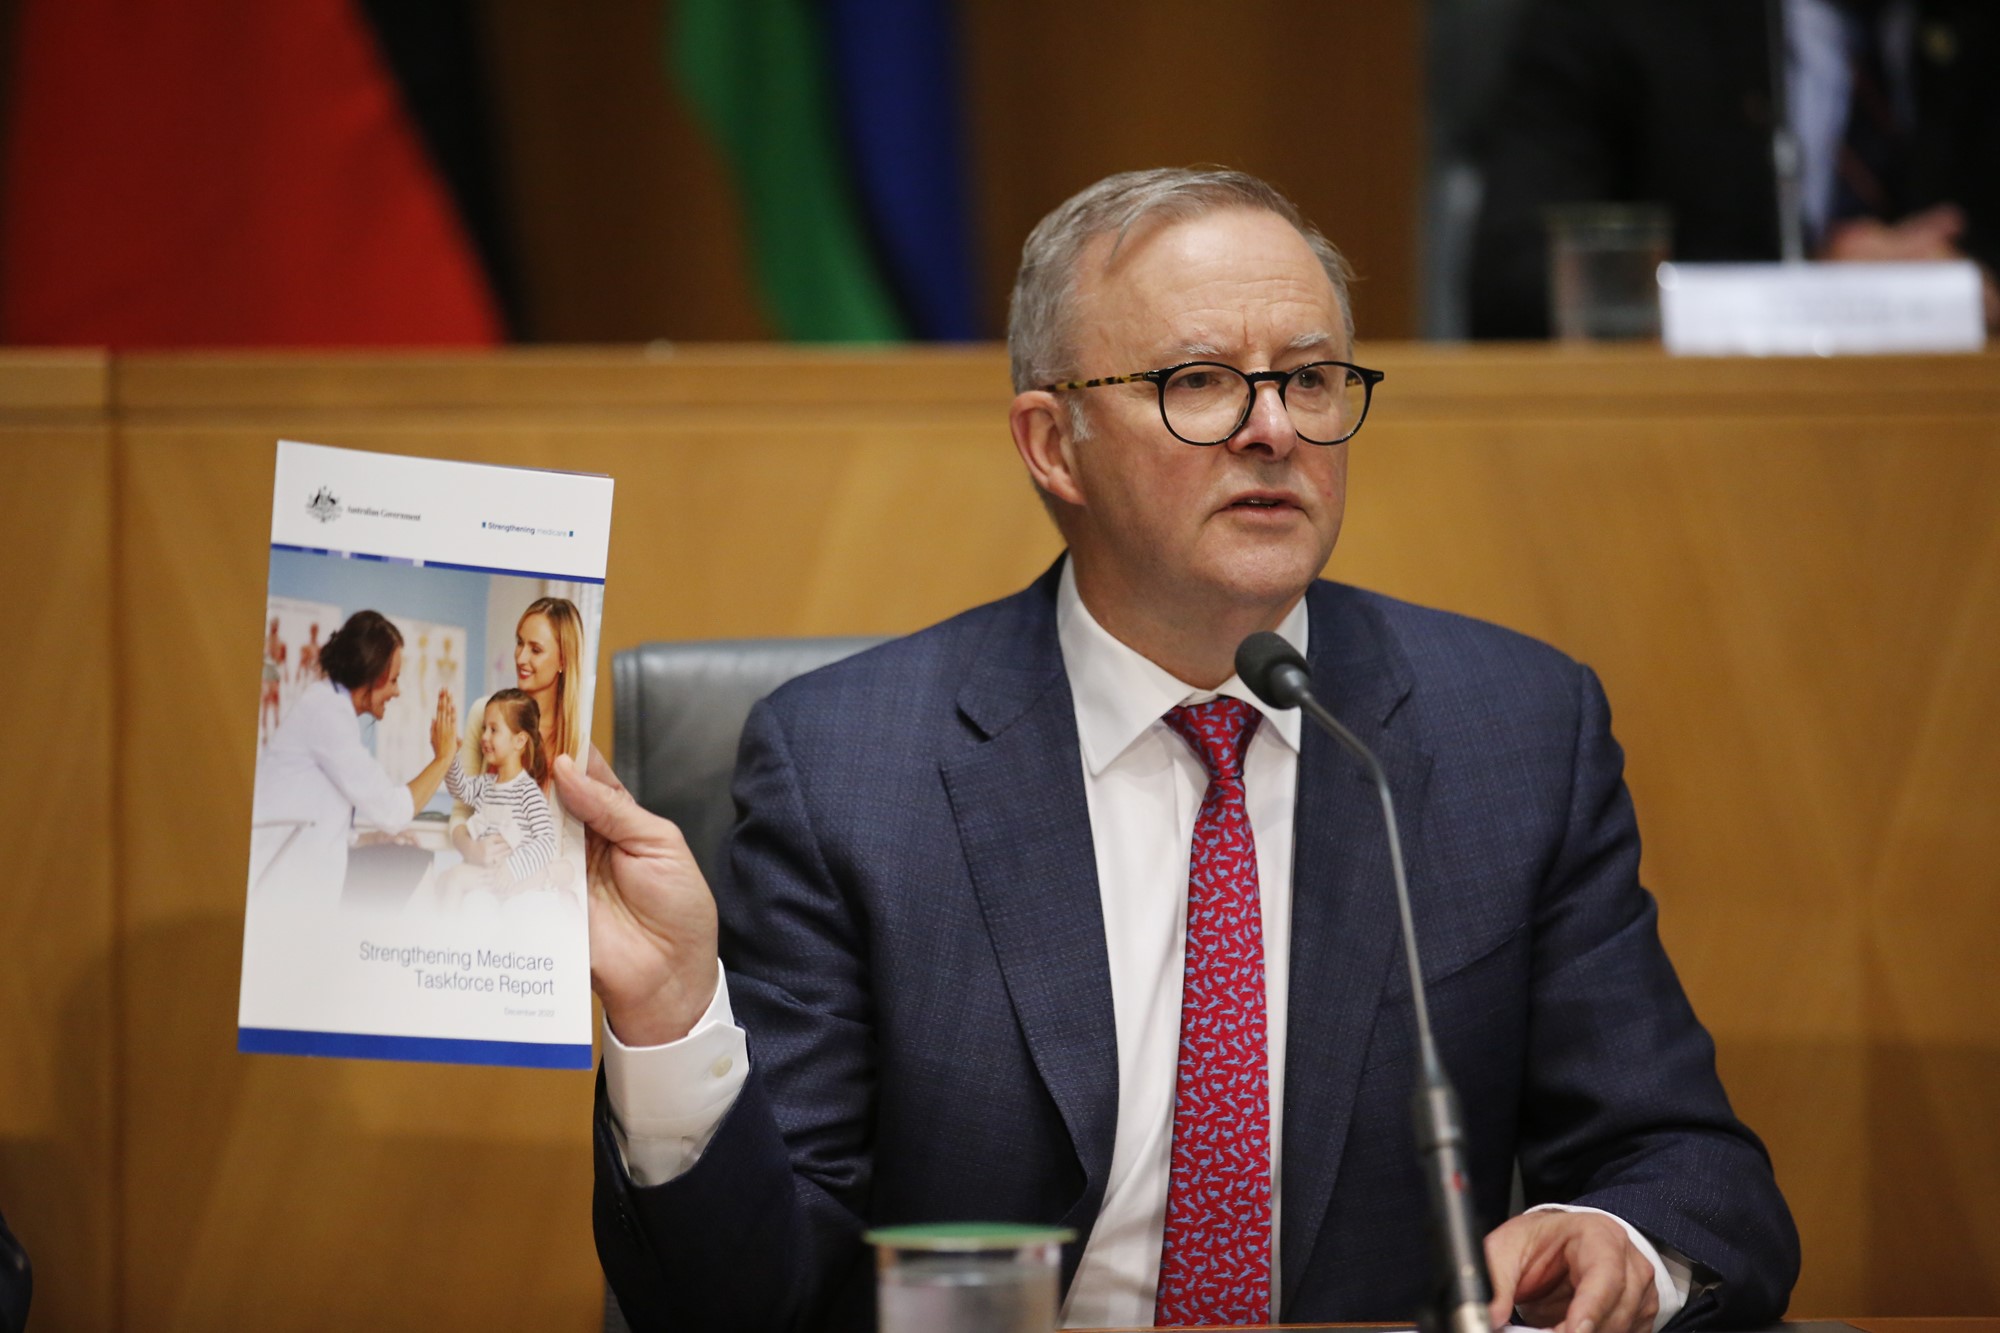 Anthony Albanese holds up the medicare report